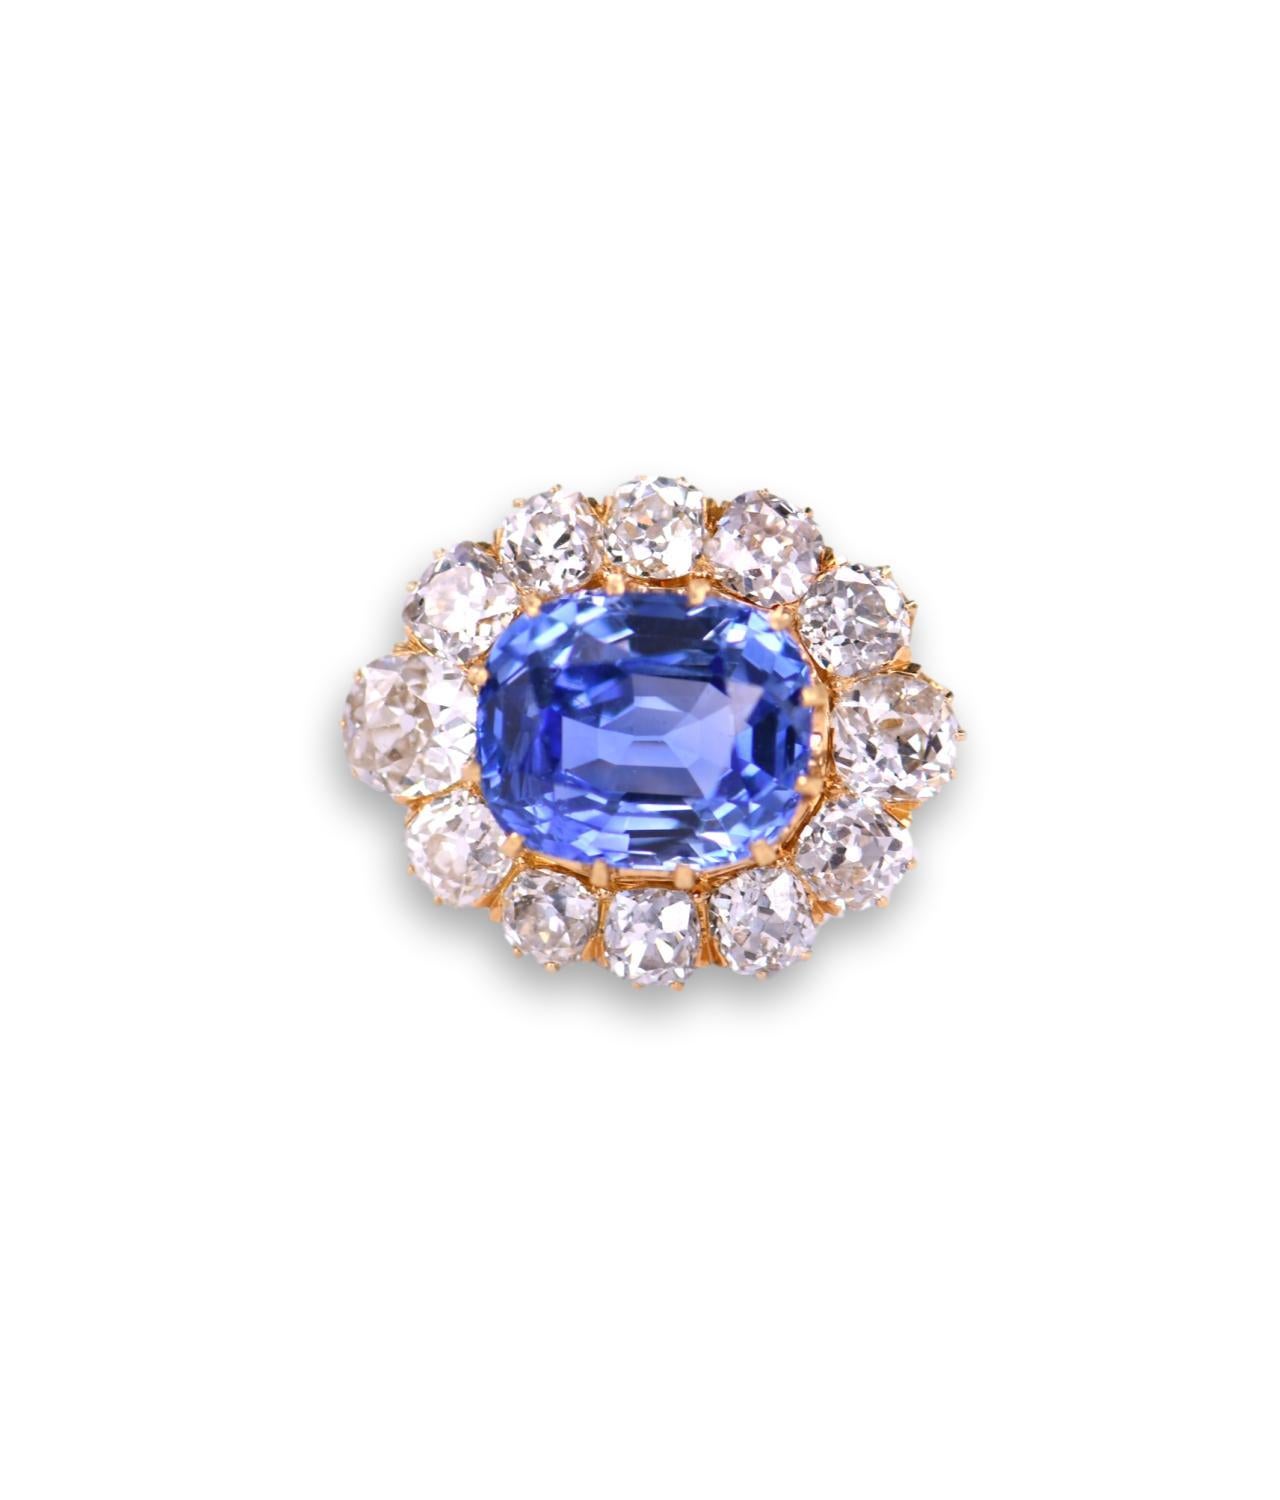 This unique 18K gold sapphire diamond brooch from the Victorian era, is centered with an impressive Ceylon No heat  GCS certified cushion cut natural blue sapphire that weighs 12ct. The sapphire is loop clean and surrounded by sparkling old mine cut